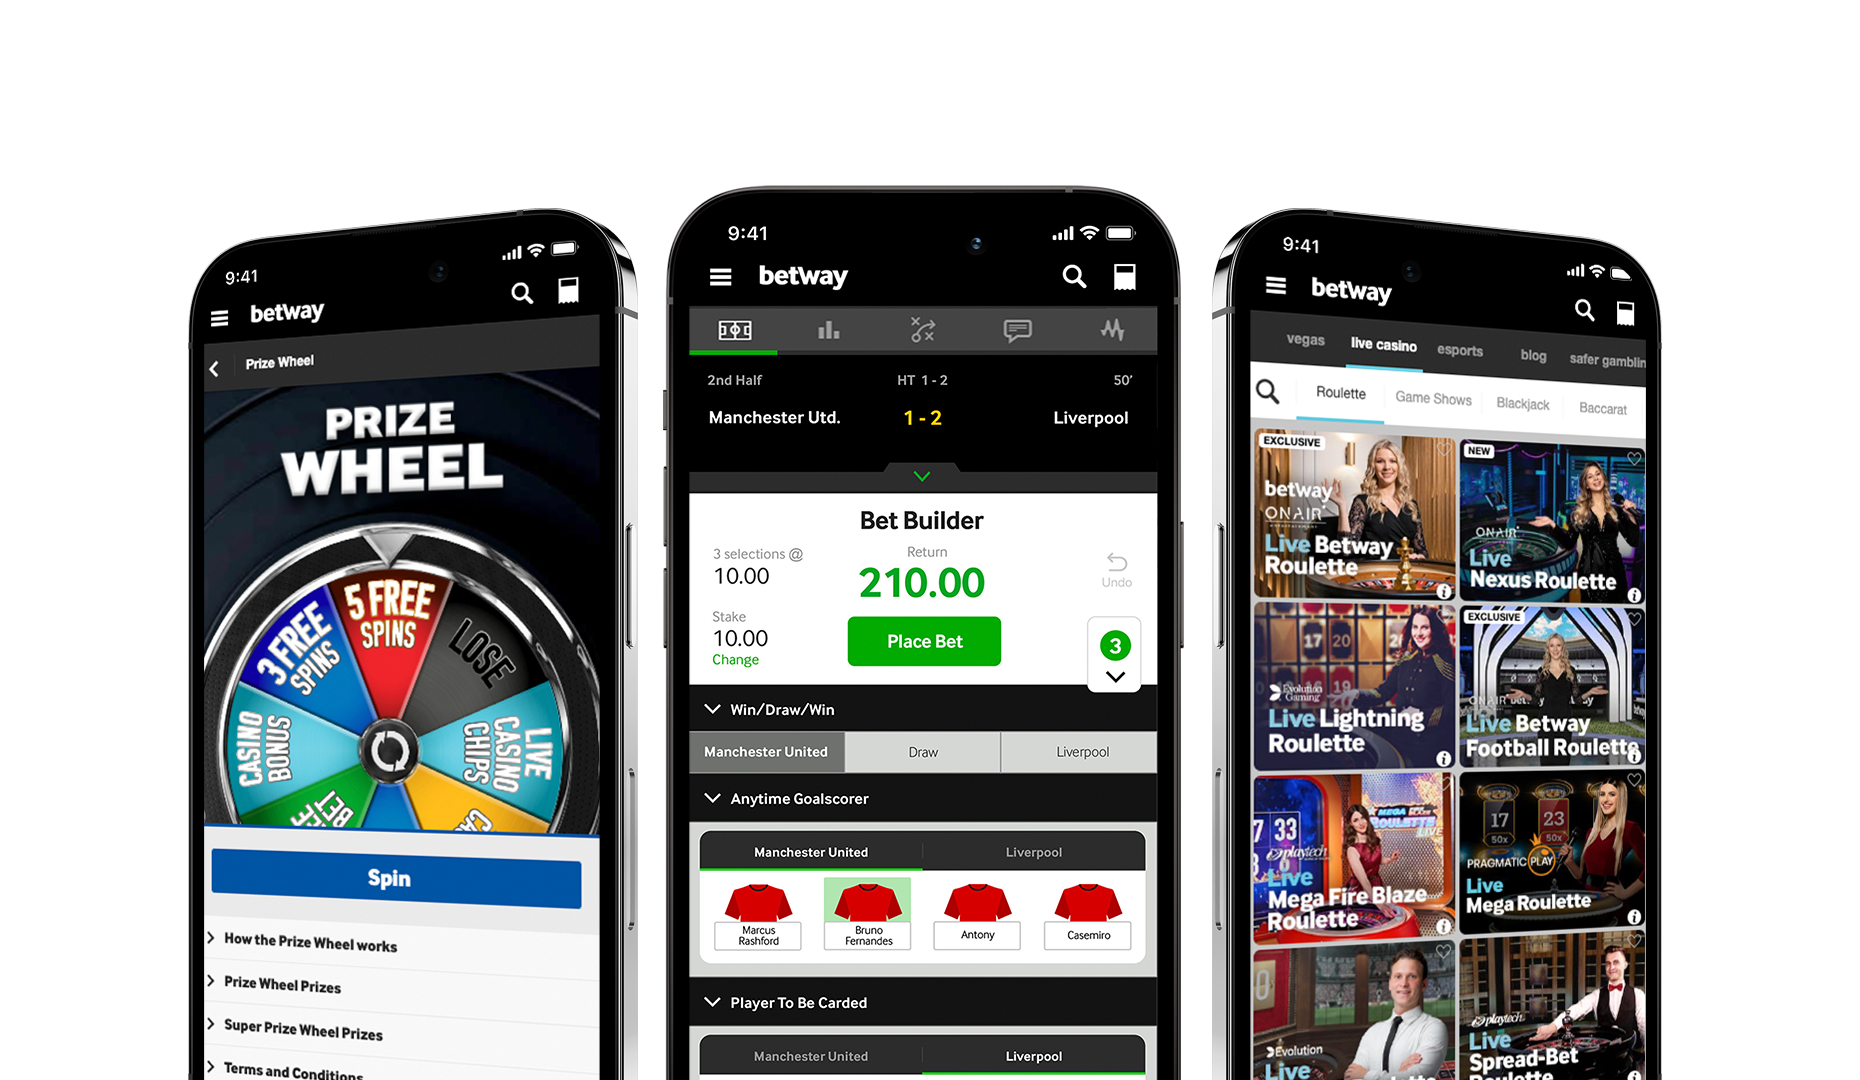 With the Betway App you can access all of your favourite sports and games, wherever you are, whenever you want.